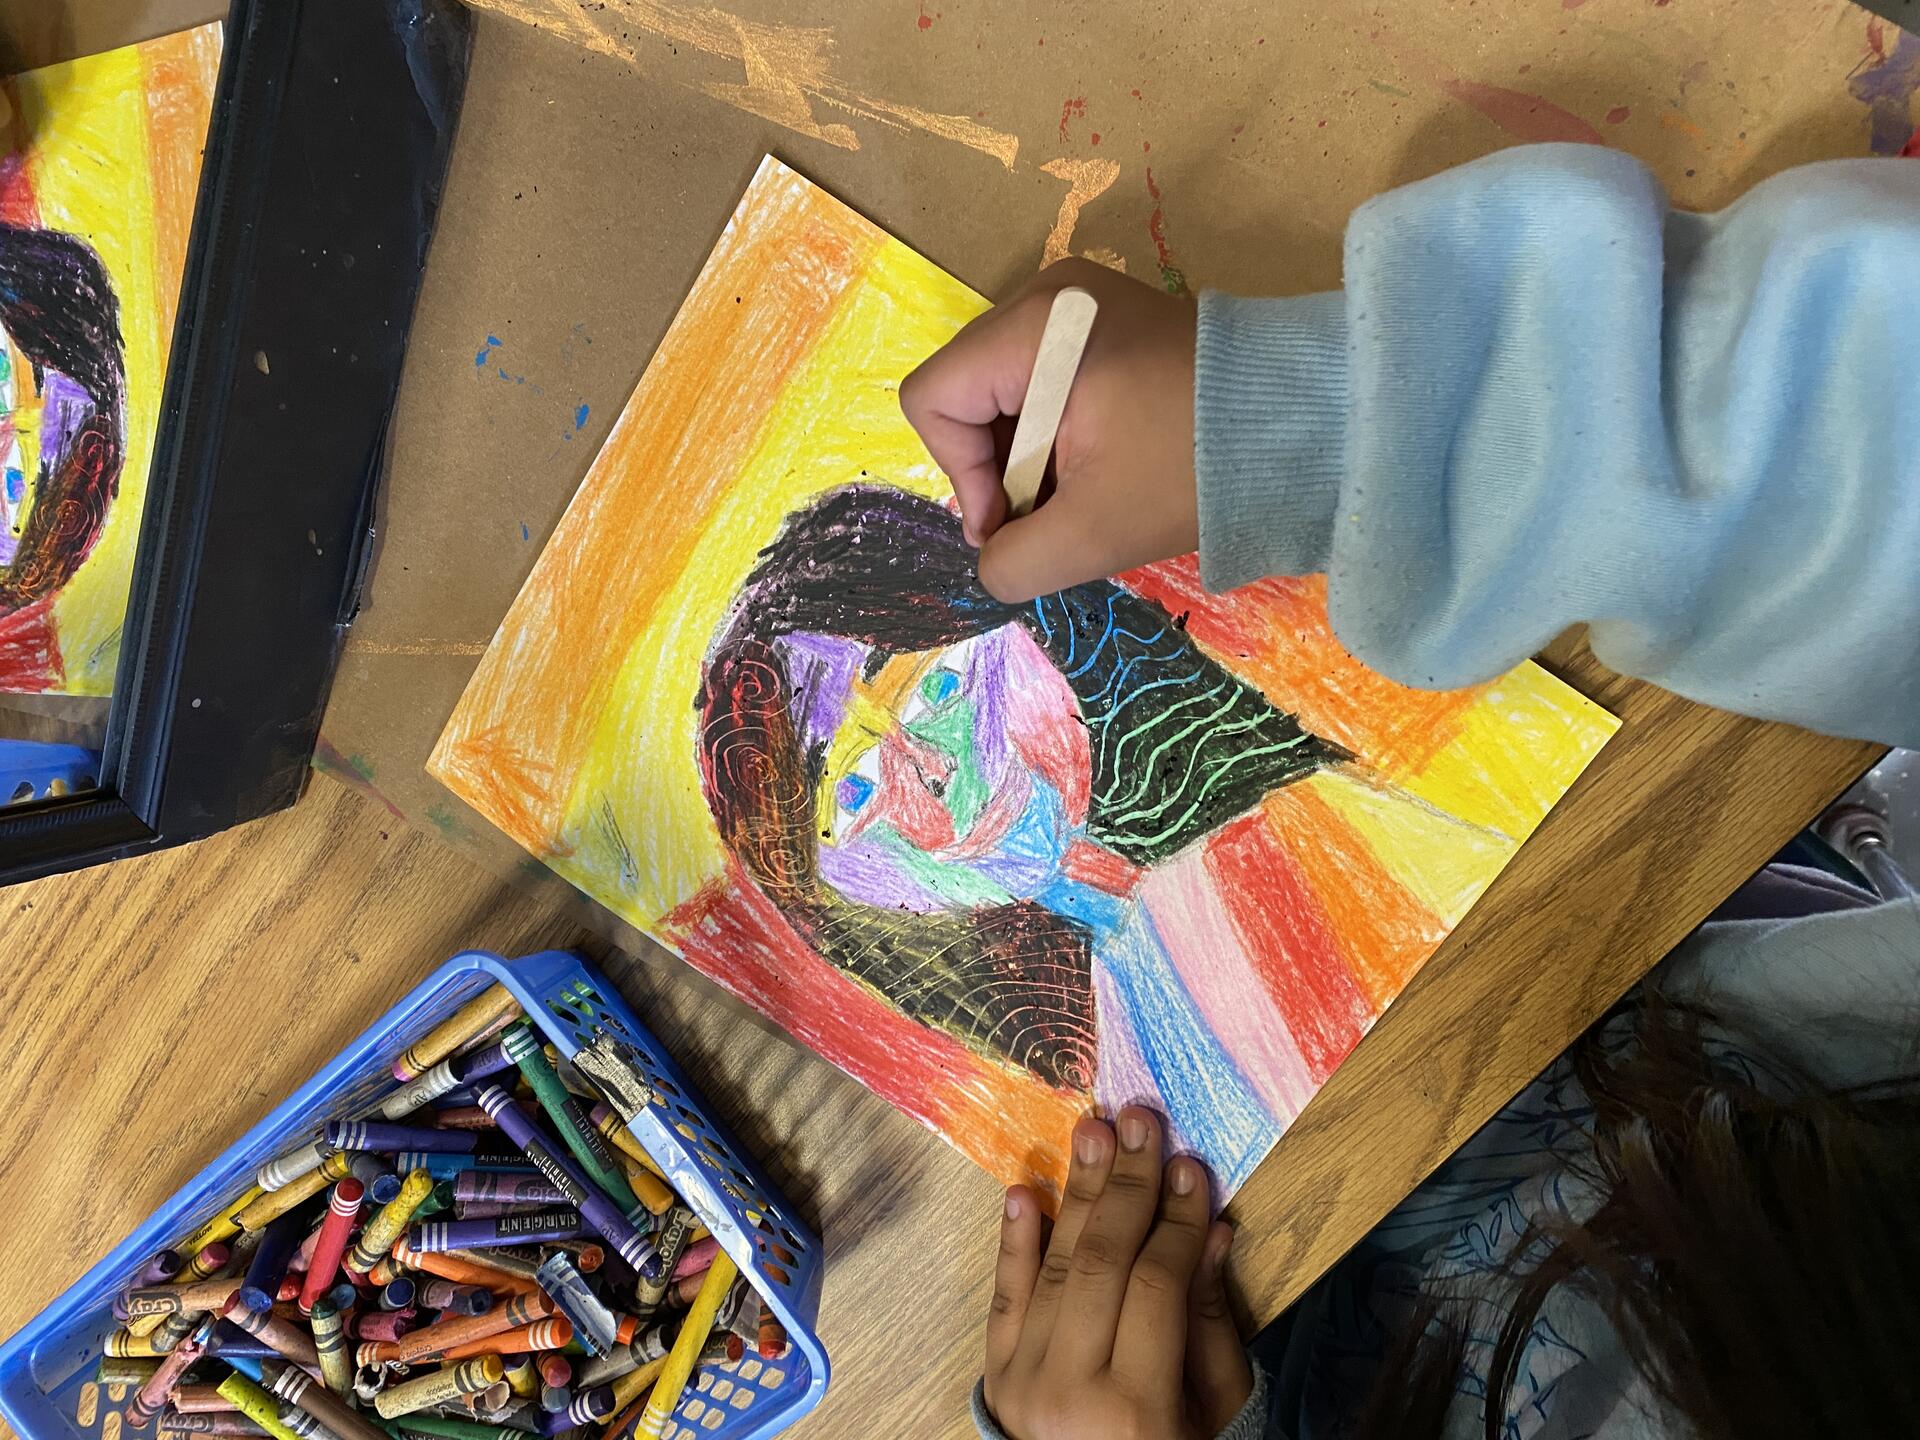 A student's hand holding a popsicles stick is scratching into a crayon-laden paper. The popsicle stick is creating patterns in the self portrait. A bin of crayons can be seen to the left of the image.